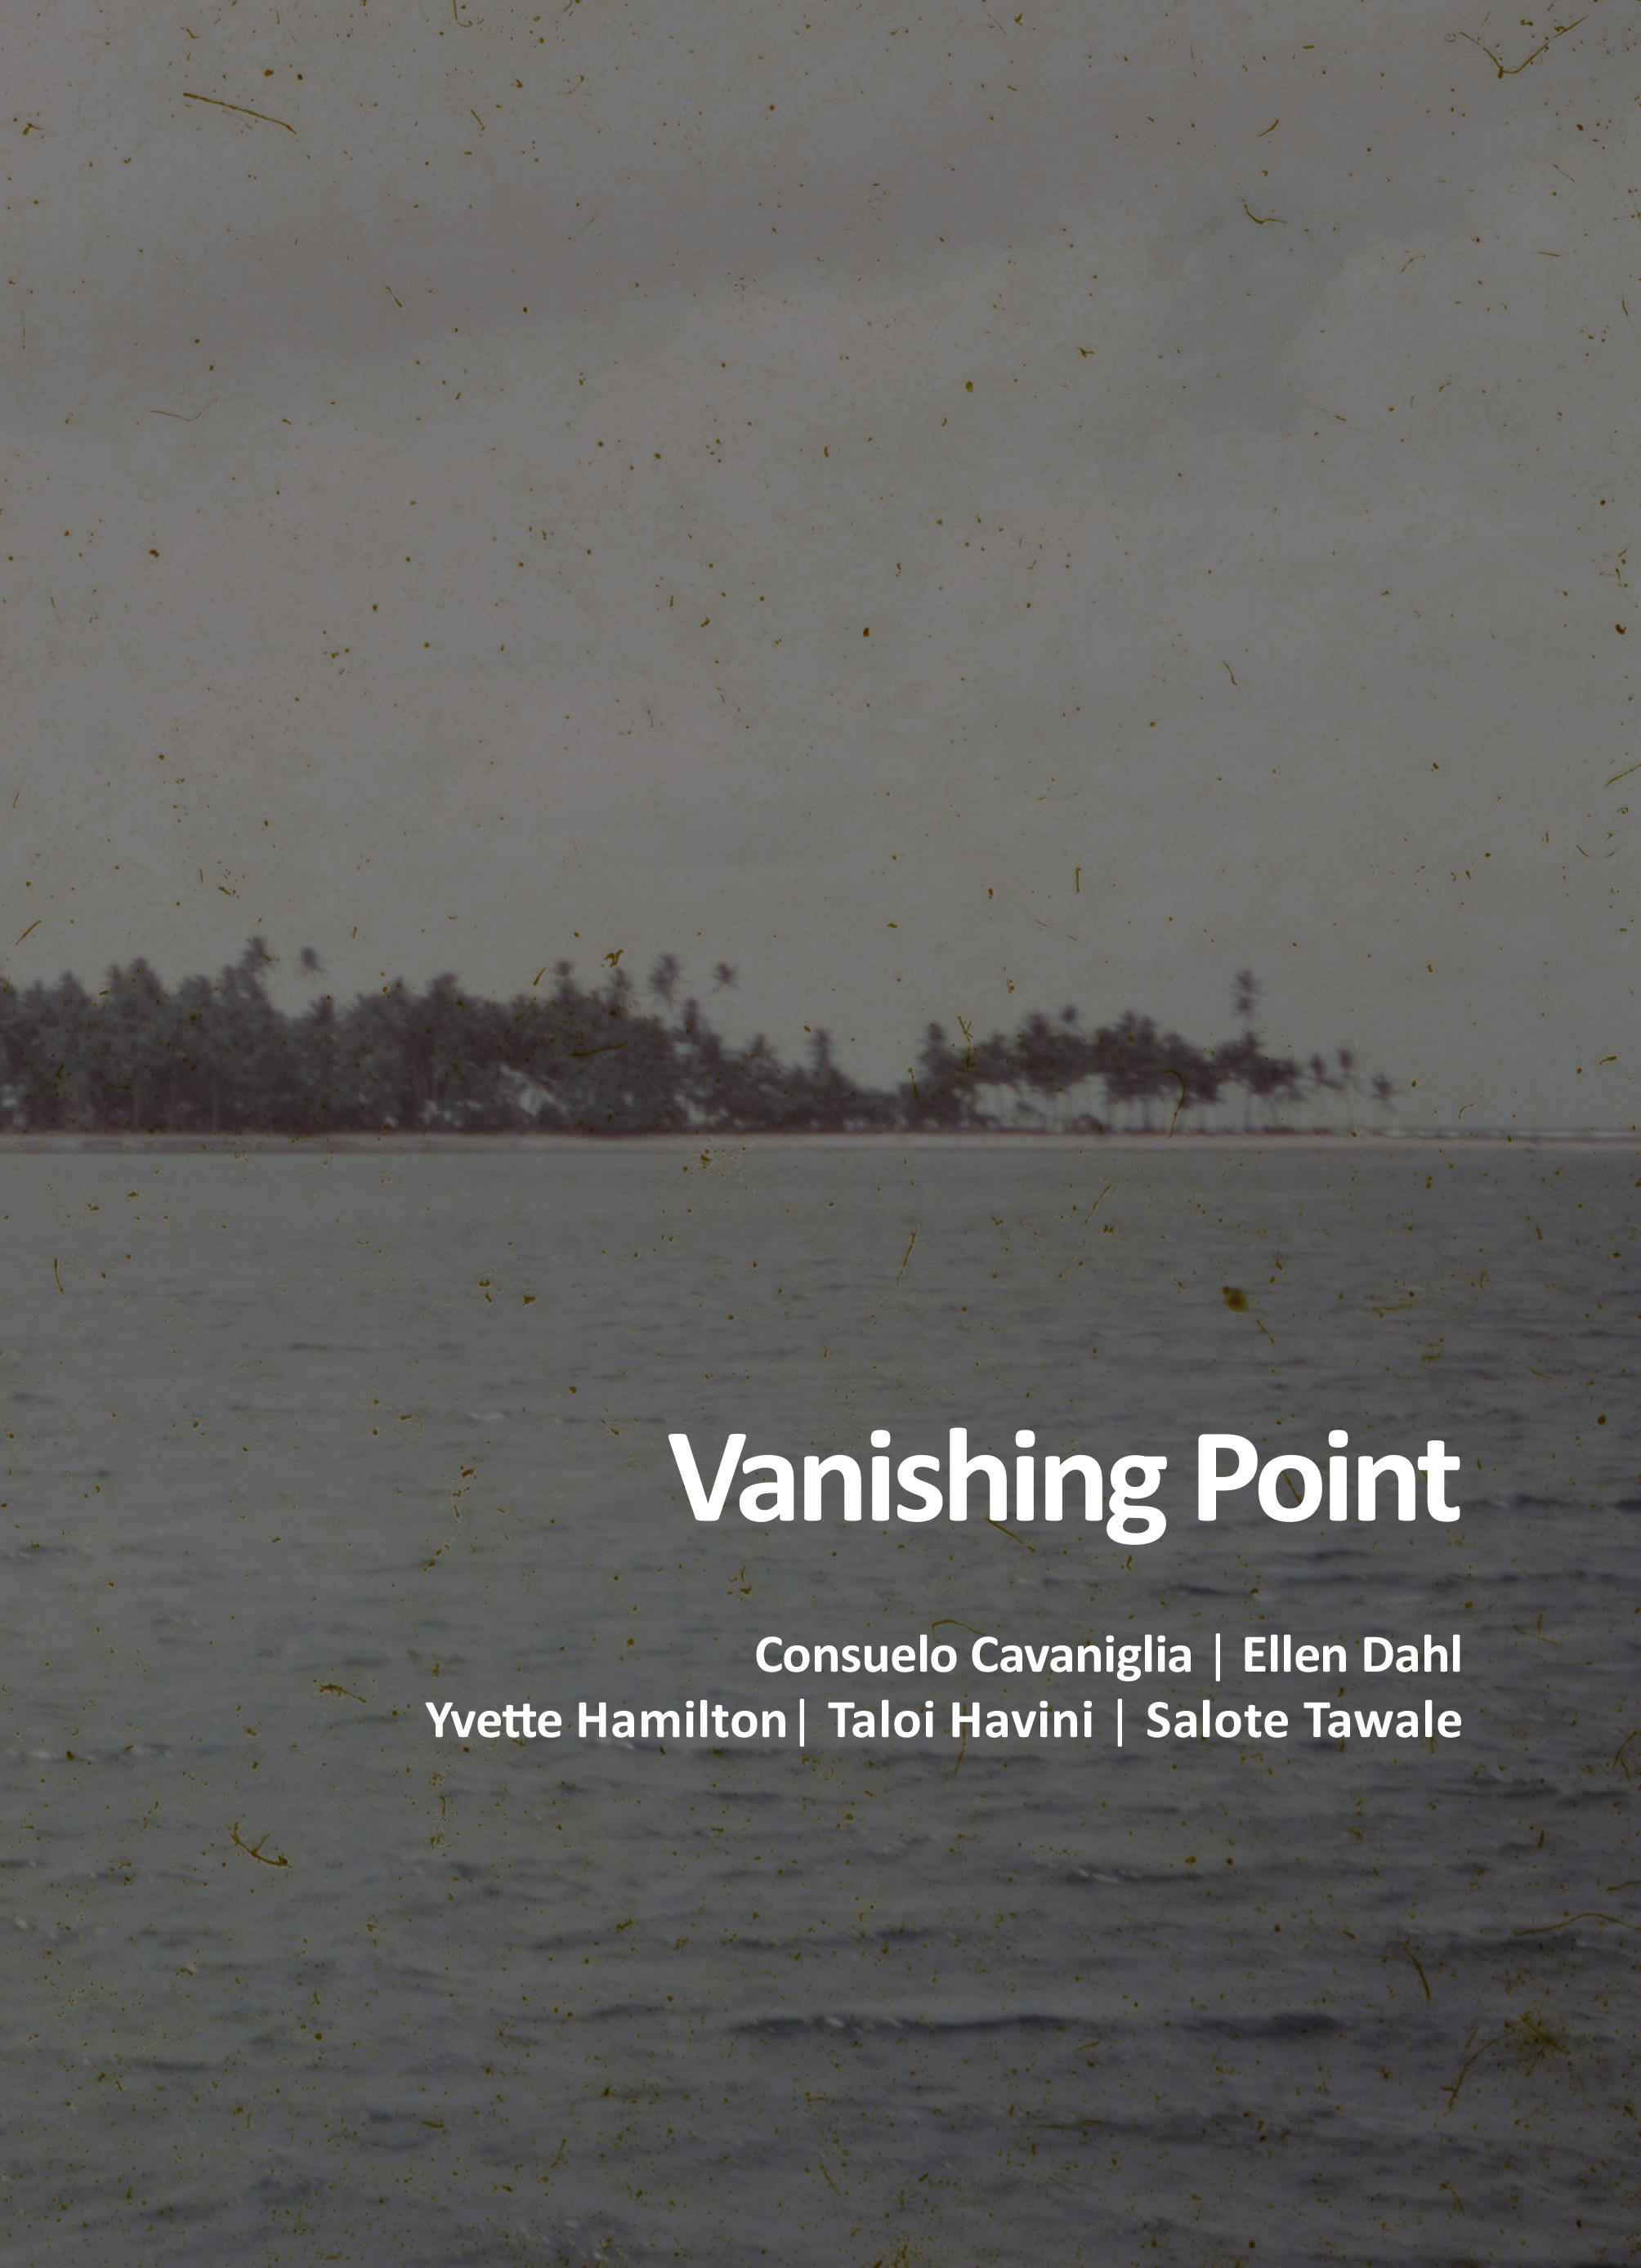 The cover of an exhibition catalogue featuring a grainy black and white photograph looking across a body of water to a headland. The exhibition title 